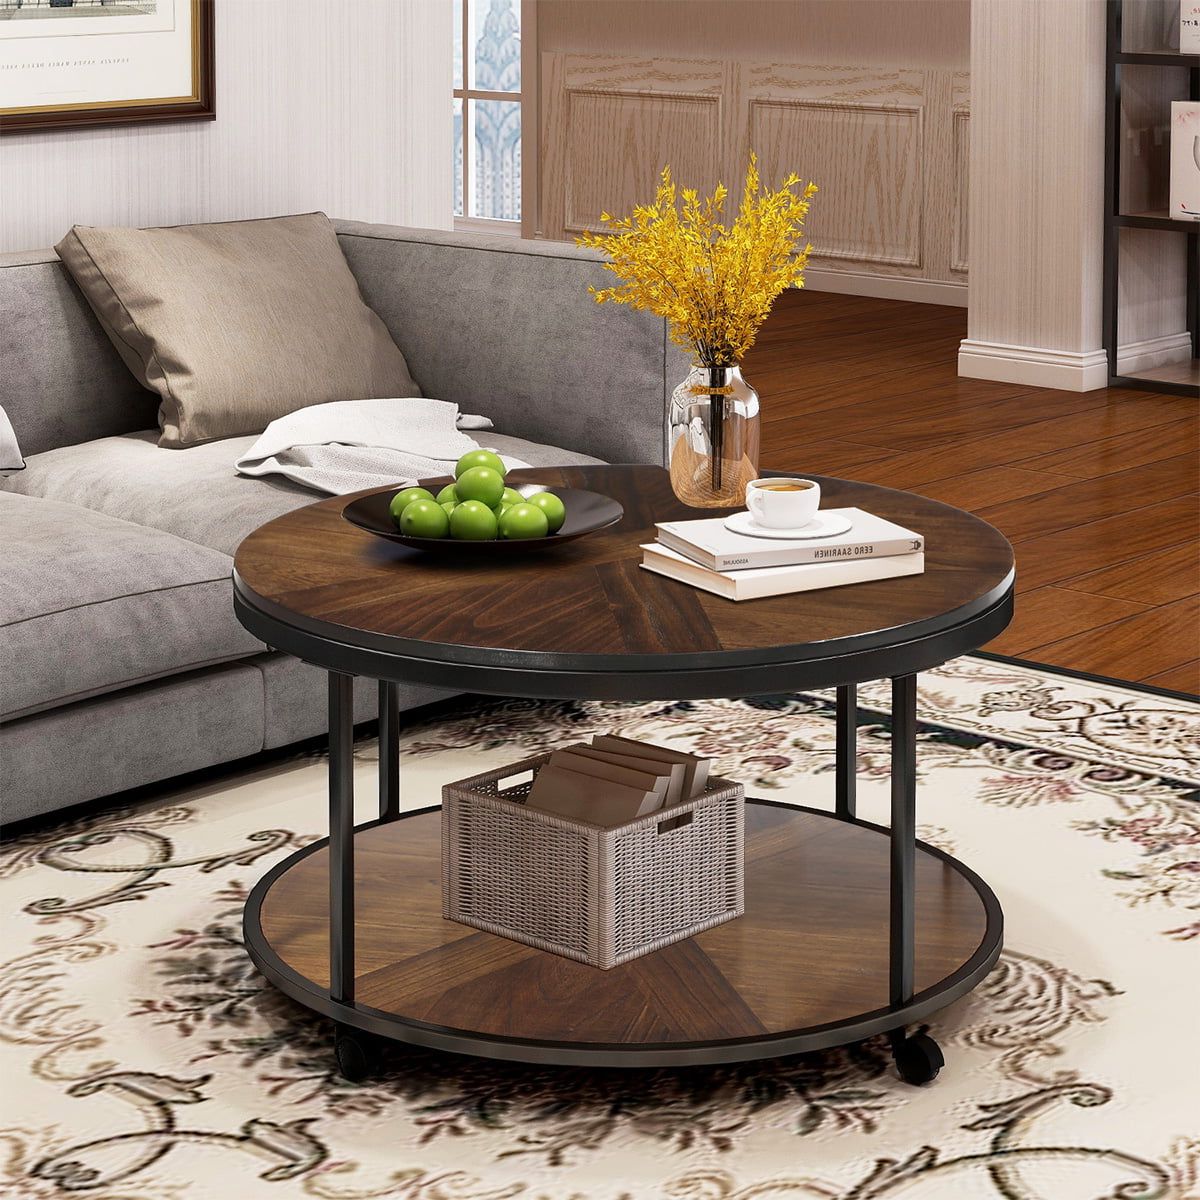 2019 Coffee Tables With Casters In Sentern Round Coffee Table With Caster Wheels And Unique Textured (View 2 of 15)